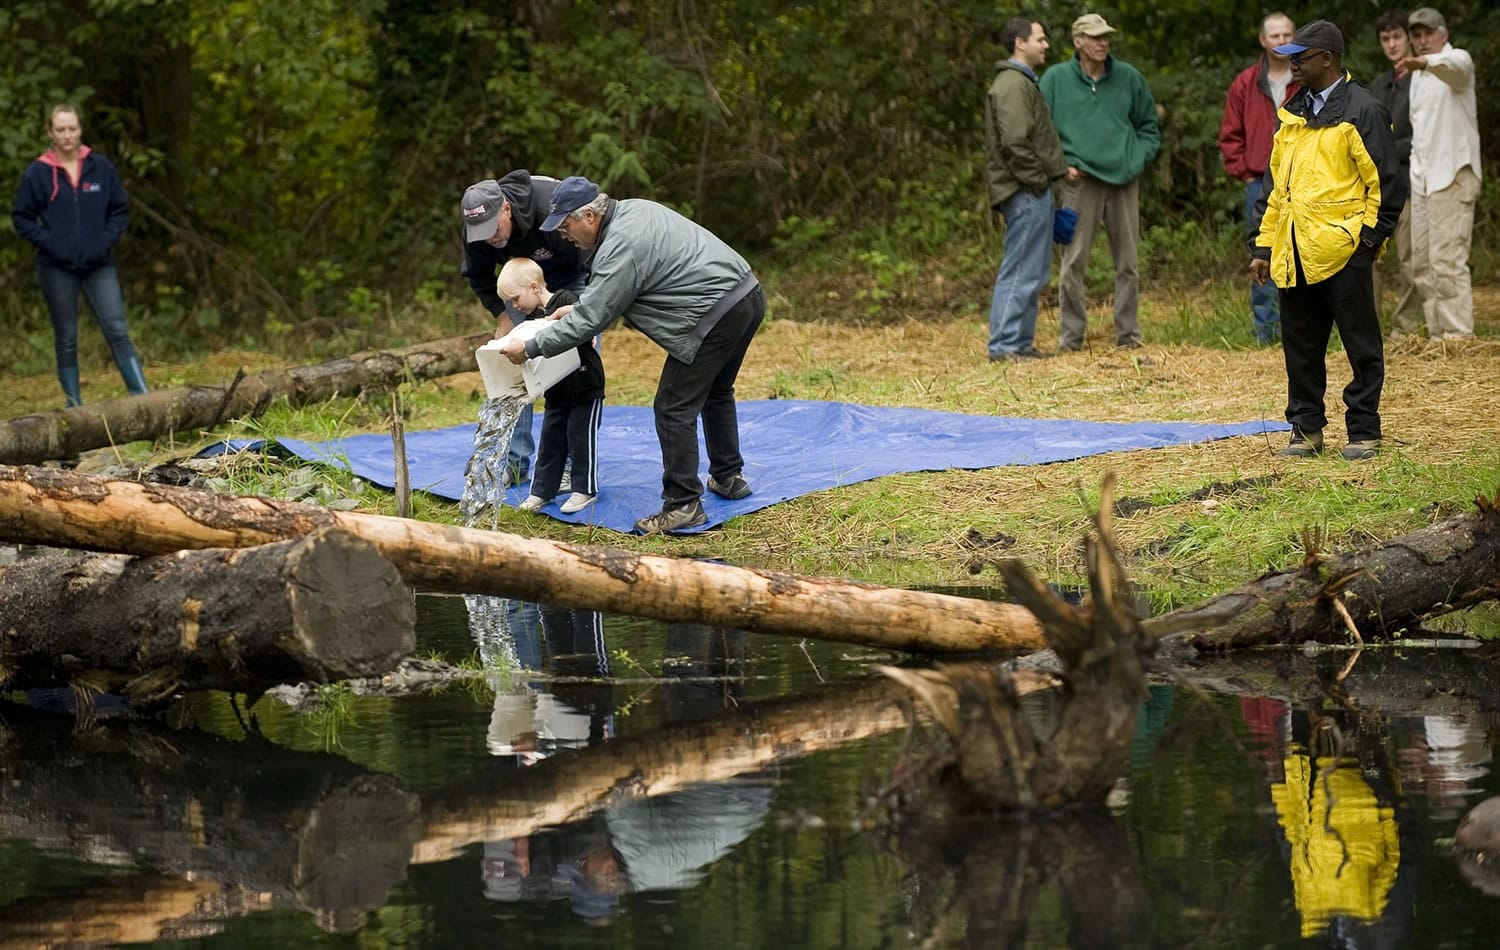 Clark County Commissioner Marc Boldt, right, helps August DeGagne, 5, and his grandfather, Mark Brislawn, release wild coho salmon into a small pond that feeds into Salmon Creek on Monday.